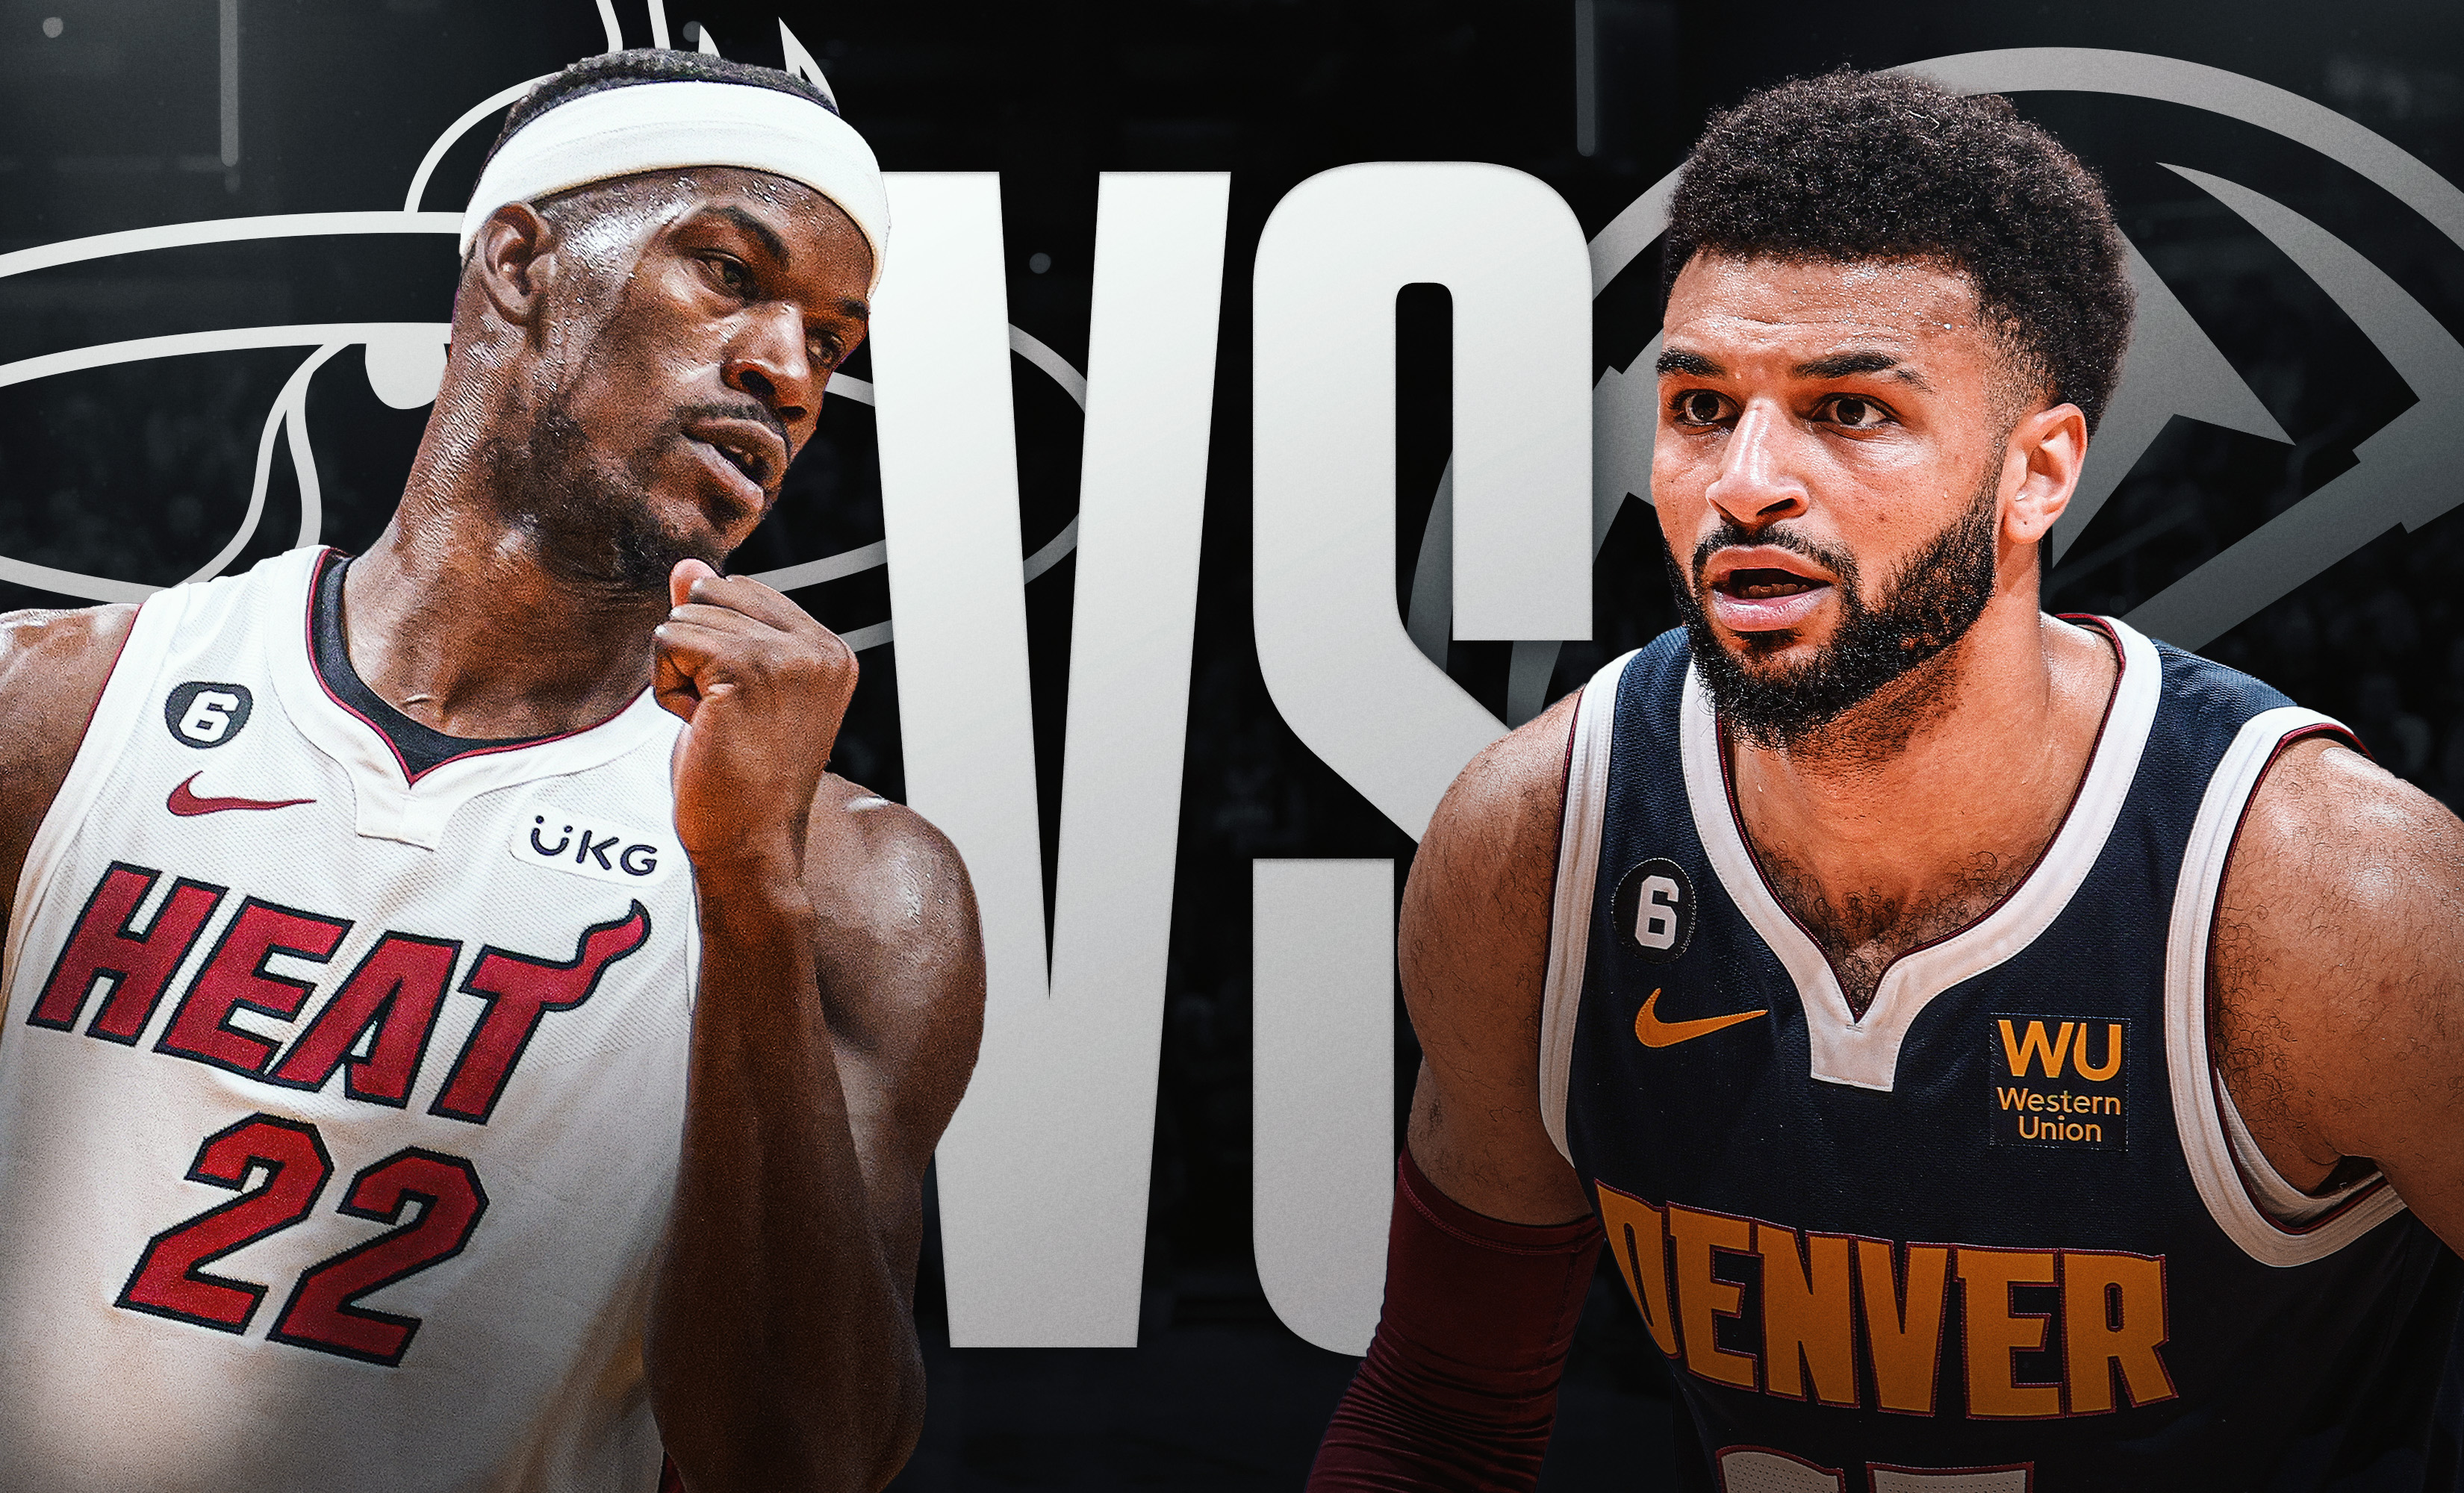 Nuggets One Win Away From Championship: Nuggets vs. Heat Game 4 Finals Preview, Odds & Predictions